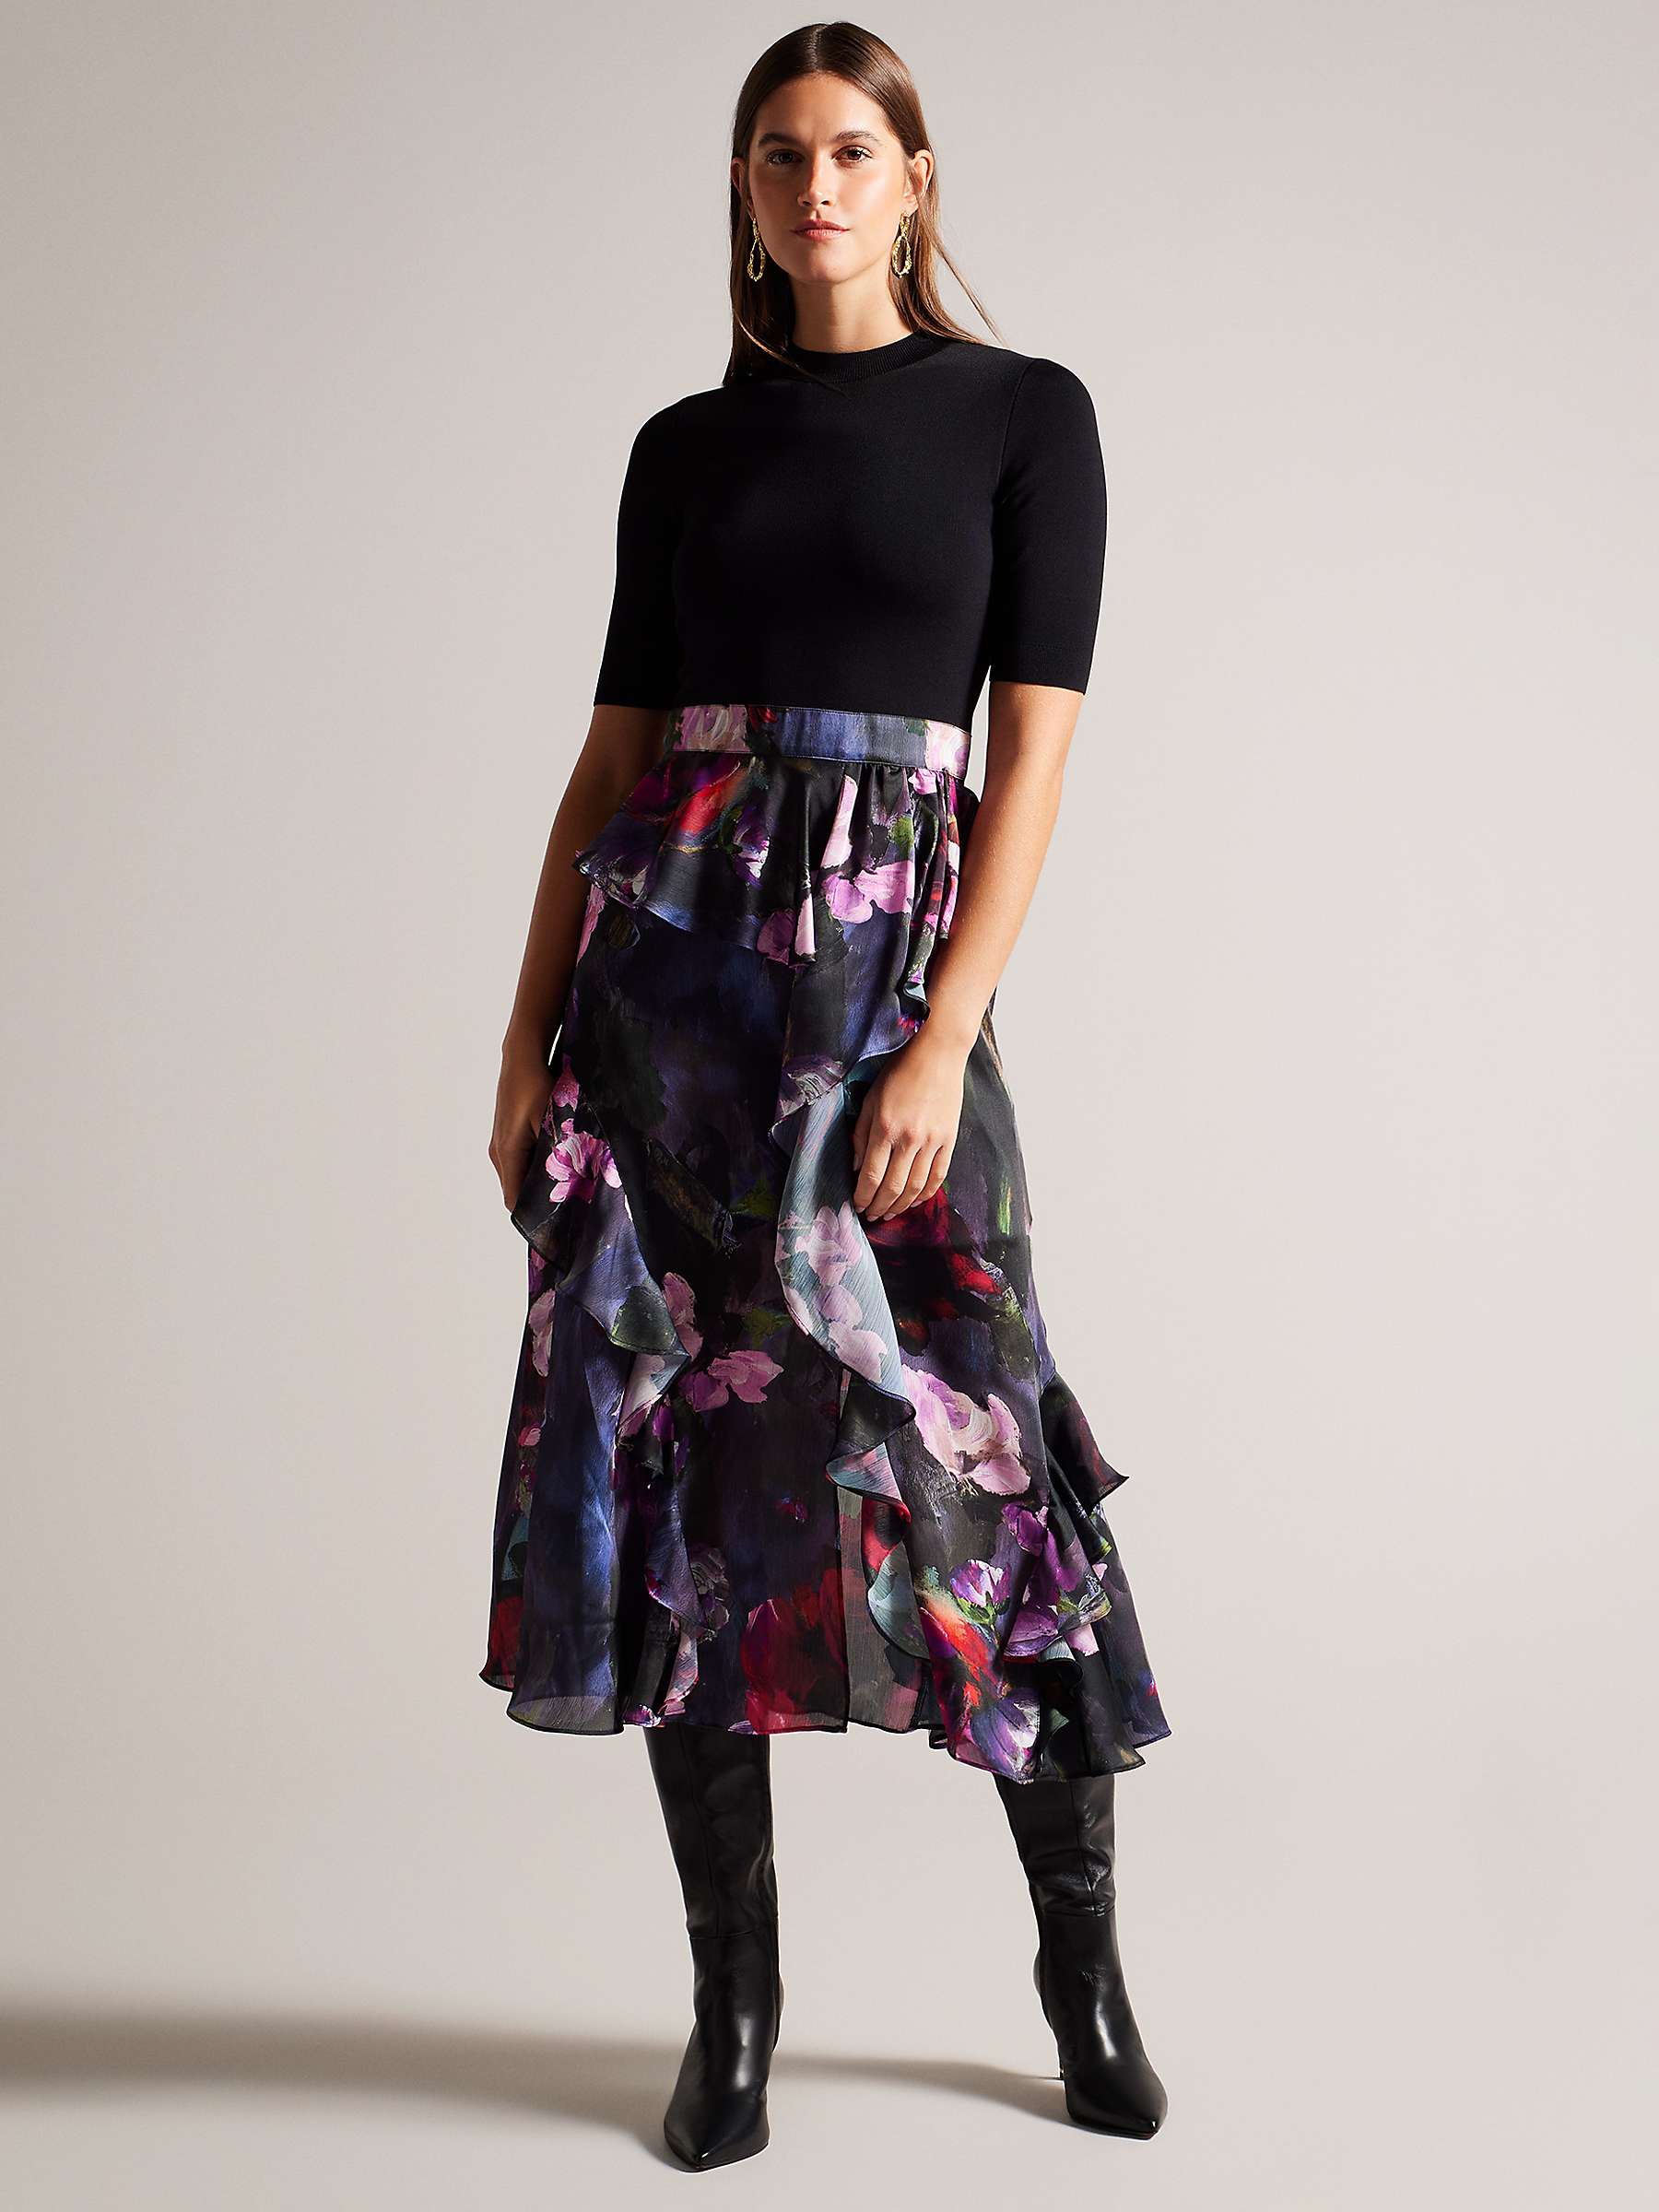 Buy Ted Baker Rowana Fitted Knit Bodice Dress With Ruffle Skirt, Black Online at johnlewis.com